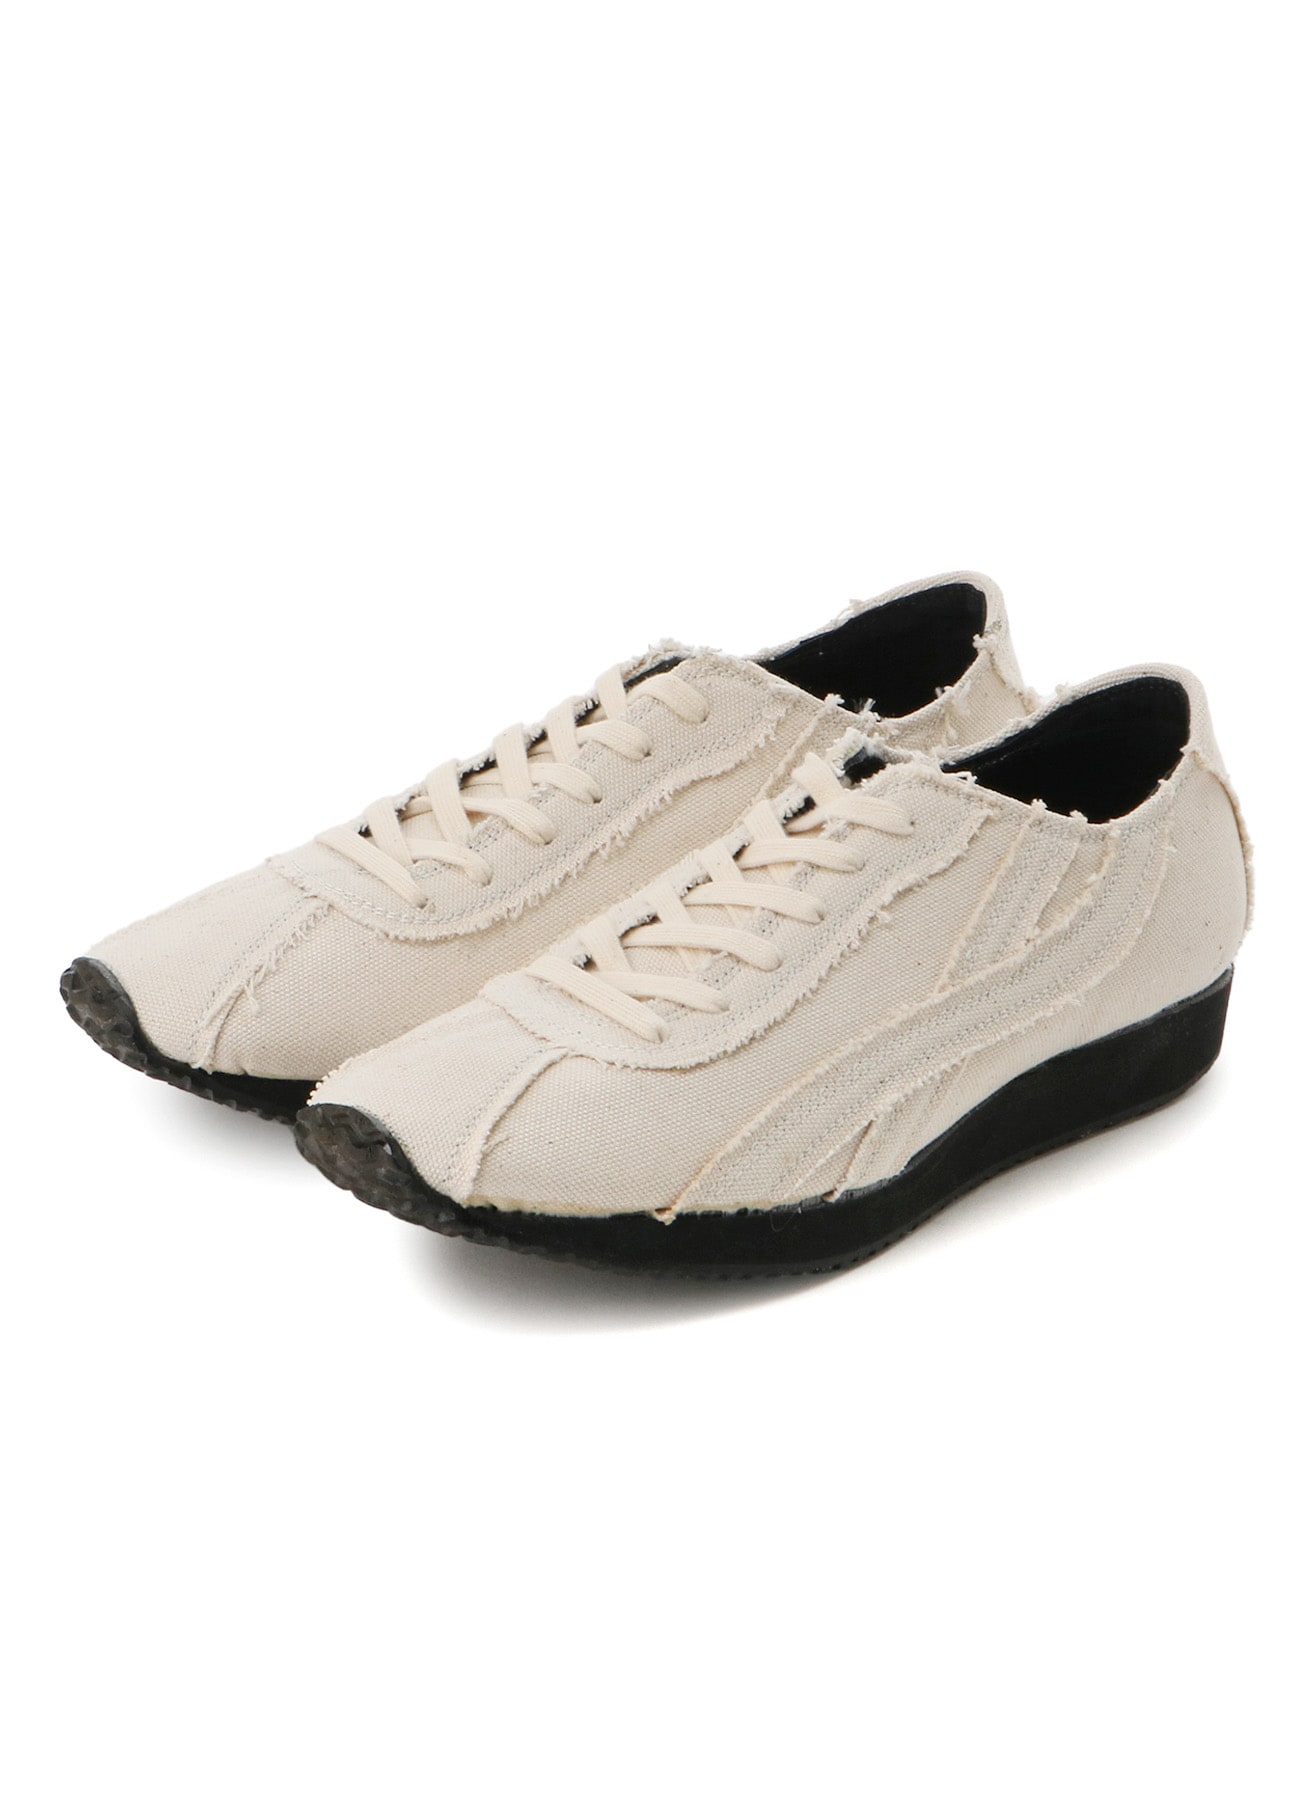 NO.8 CANVAS CUTOFF XLINE RUNNING SHOES (US 8 Ivory): Vintage | THE 